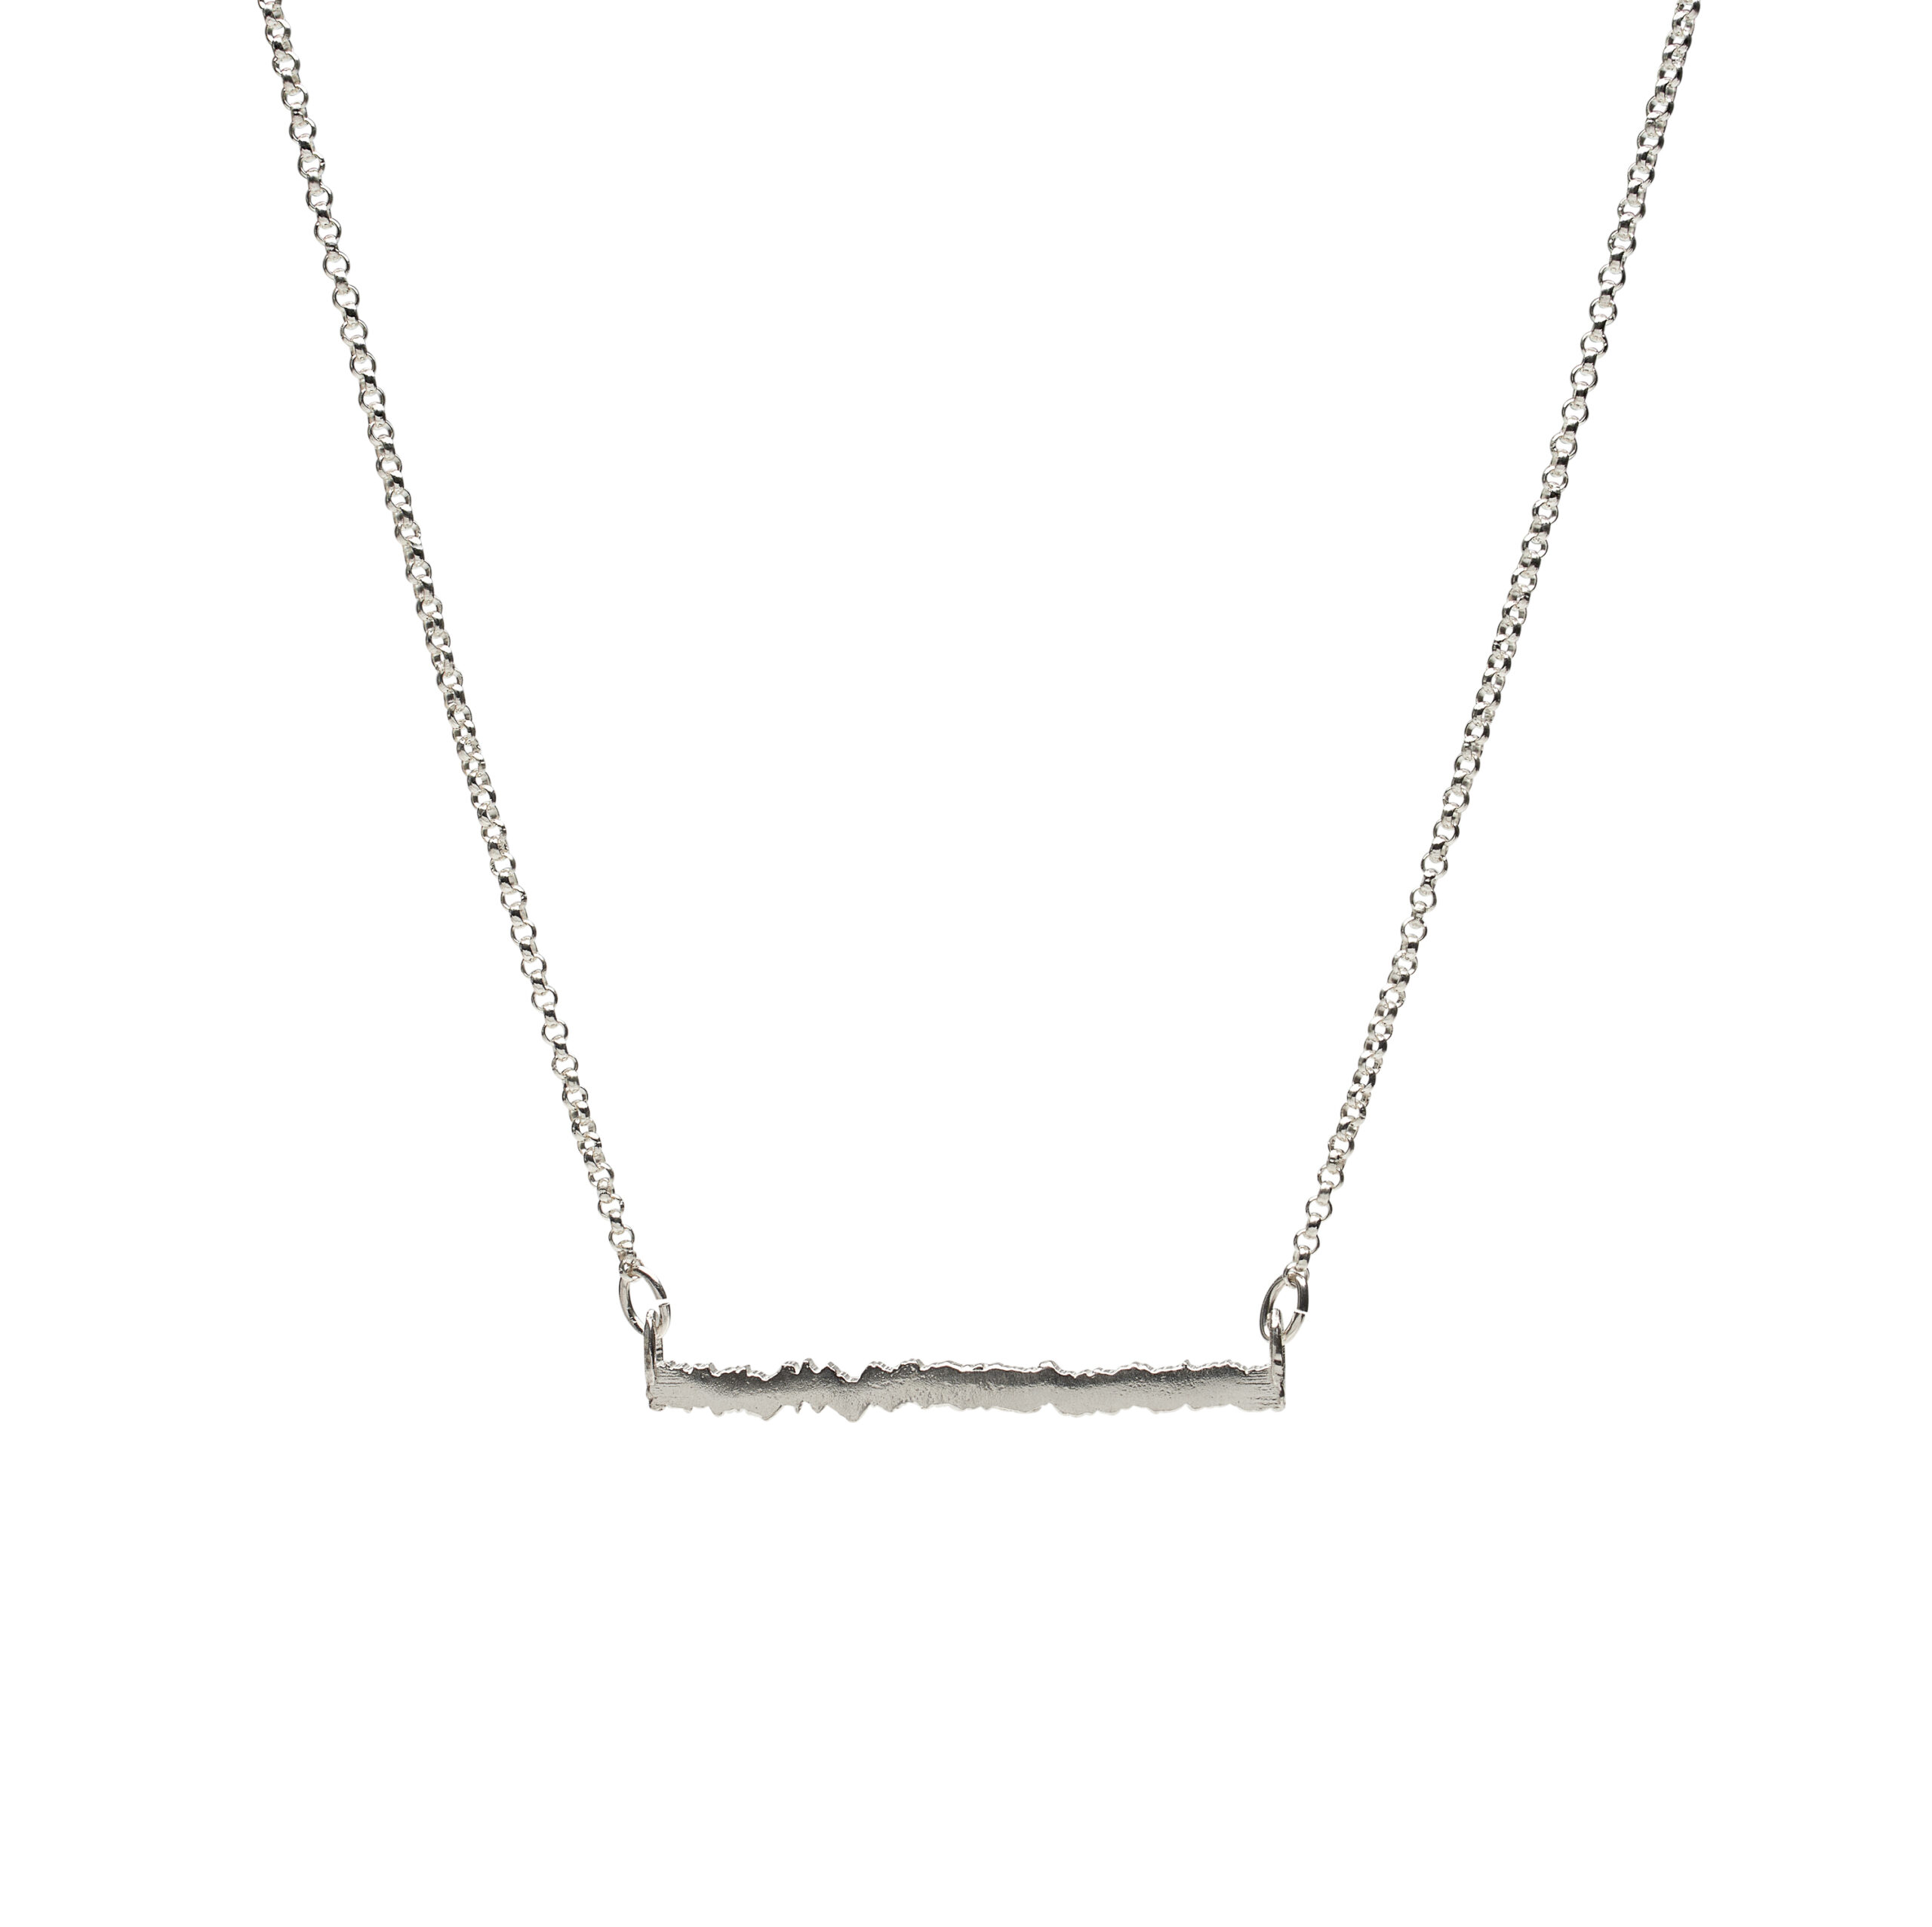 Necklace depicting the Long Trail elevation profile